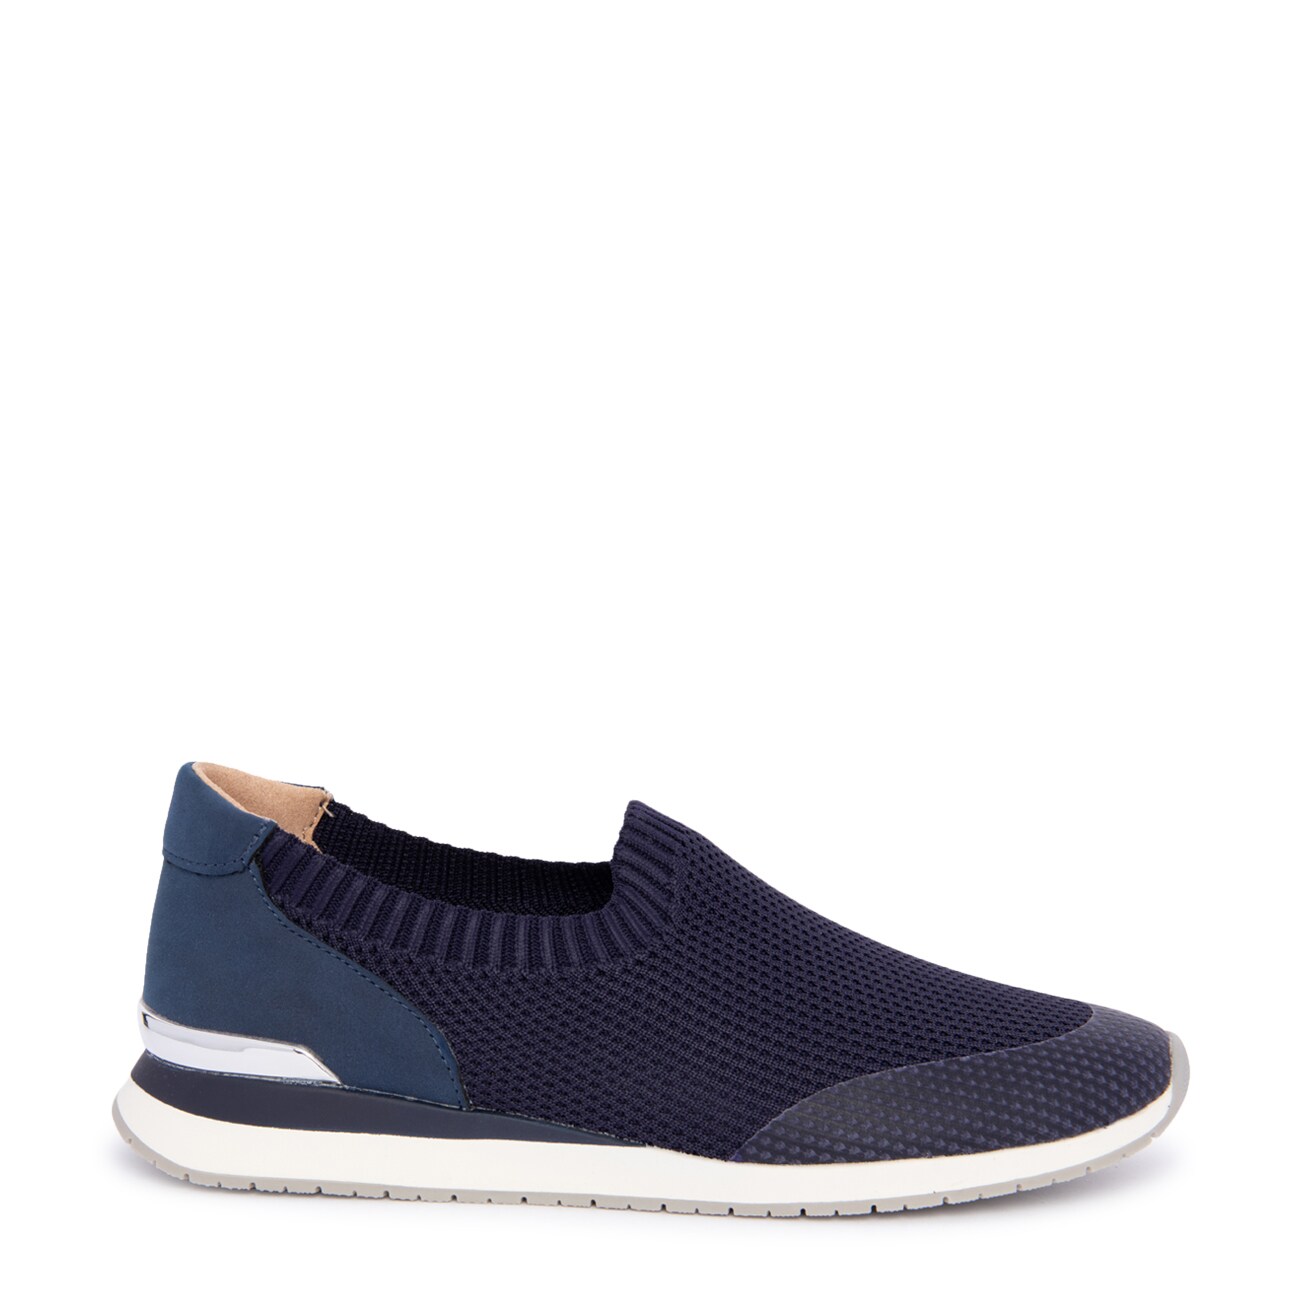 Naturalizer Lafayette Slip-On Sneakers | The Shoe Company